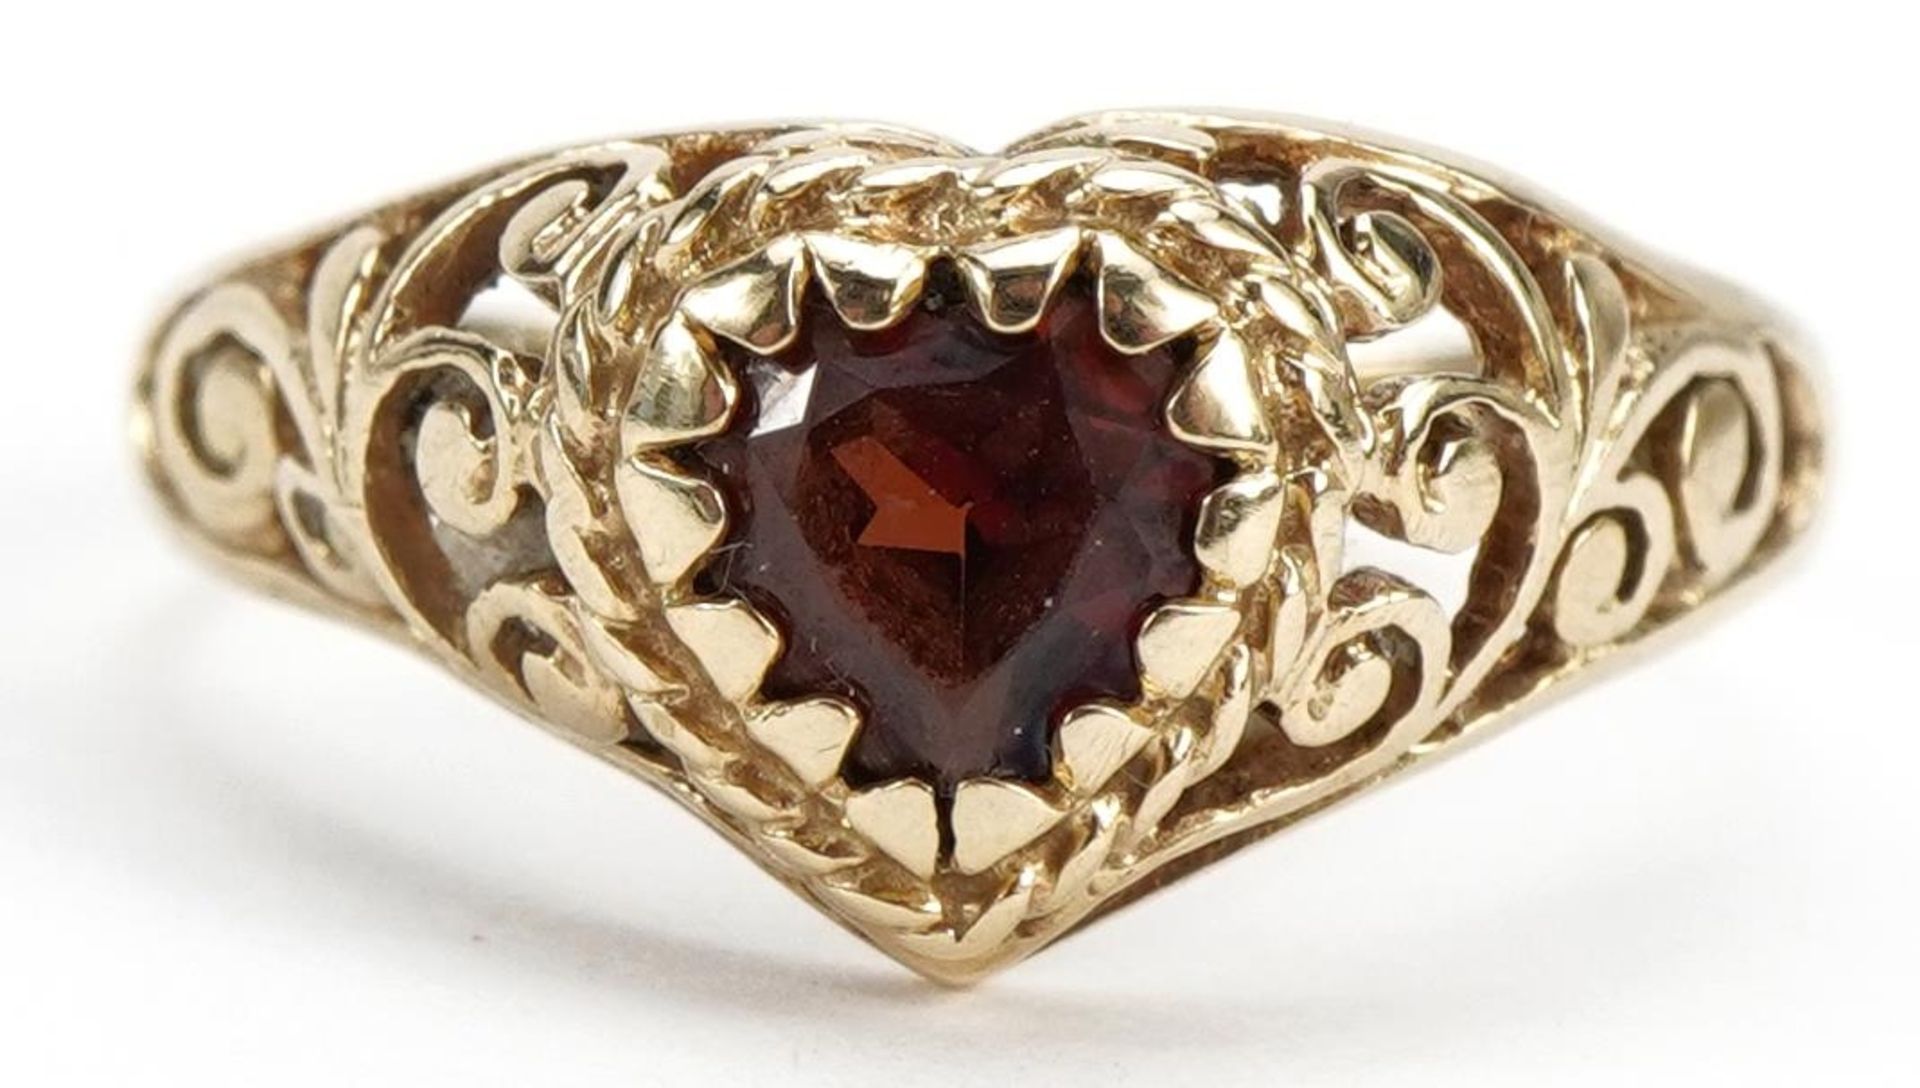 9ct gold garnet love heart ring with pierced shoulders, size I/J, 1.4g